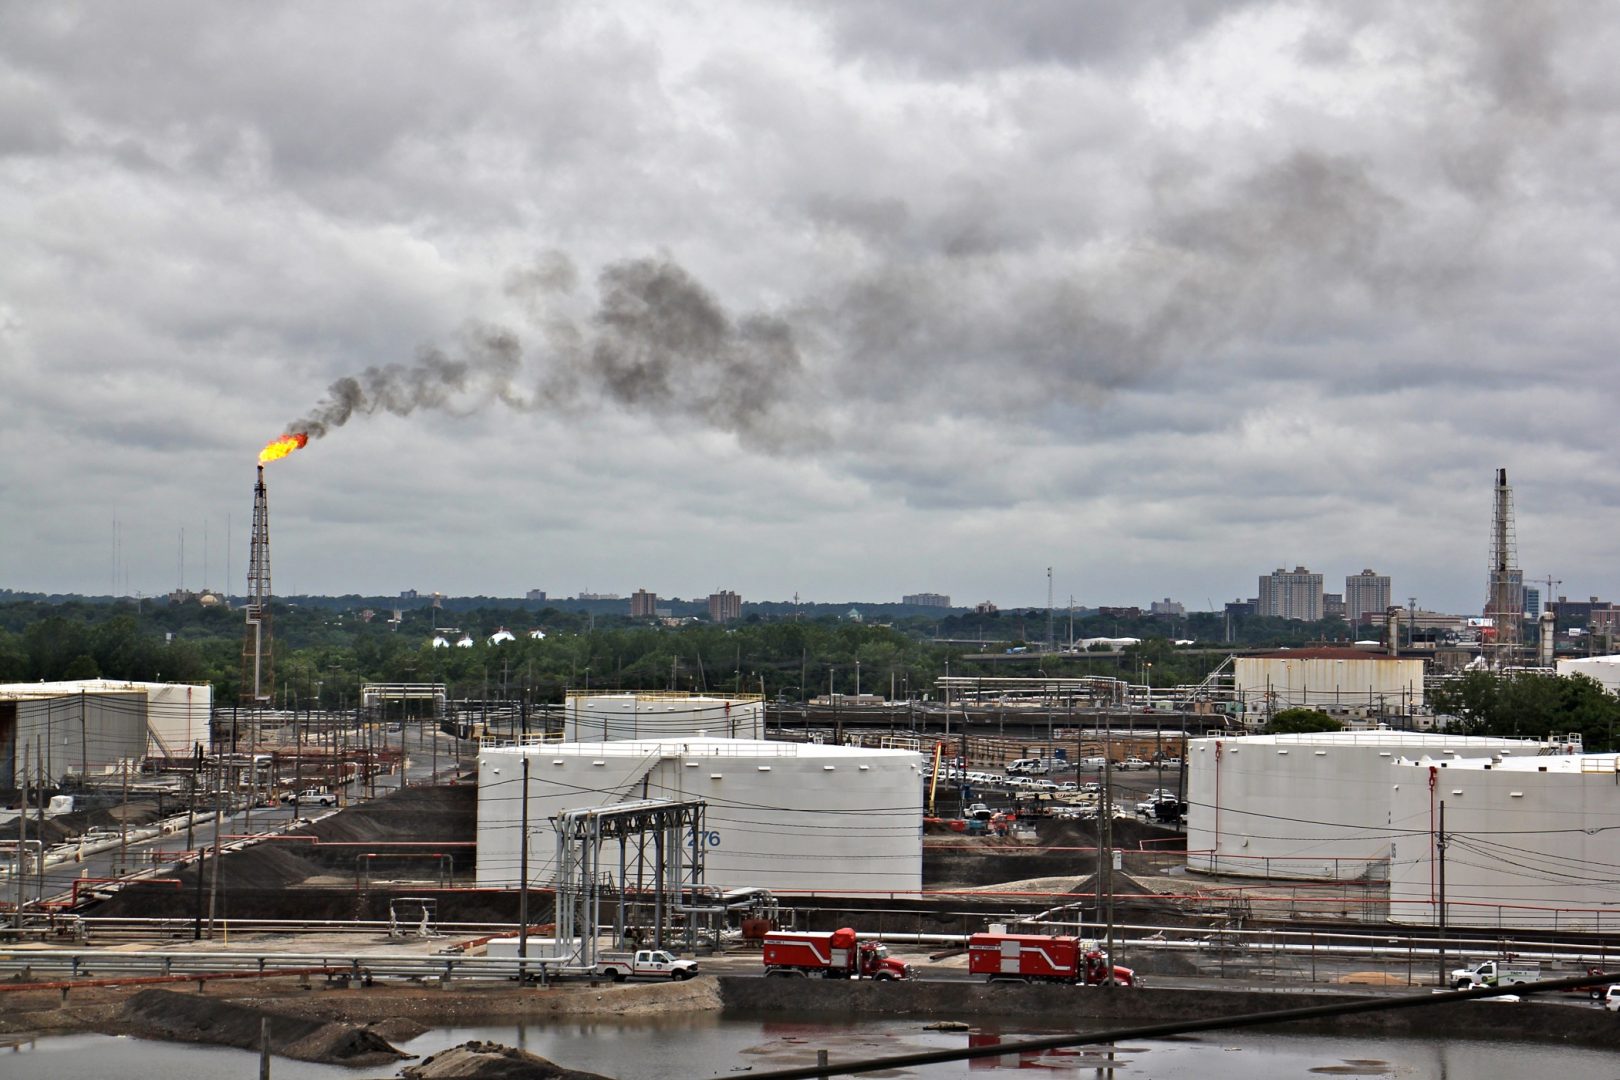 A large flare burns off fuel at Philadelphia Energy Solutions refinery while firefighters battle a fire there. The wind carried the black smoke toward residential areas of South Philadelphia. 